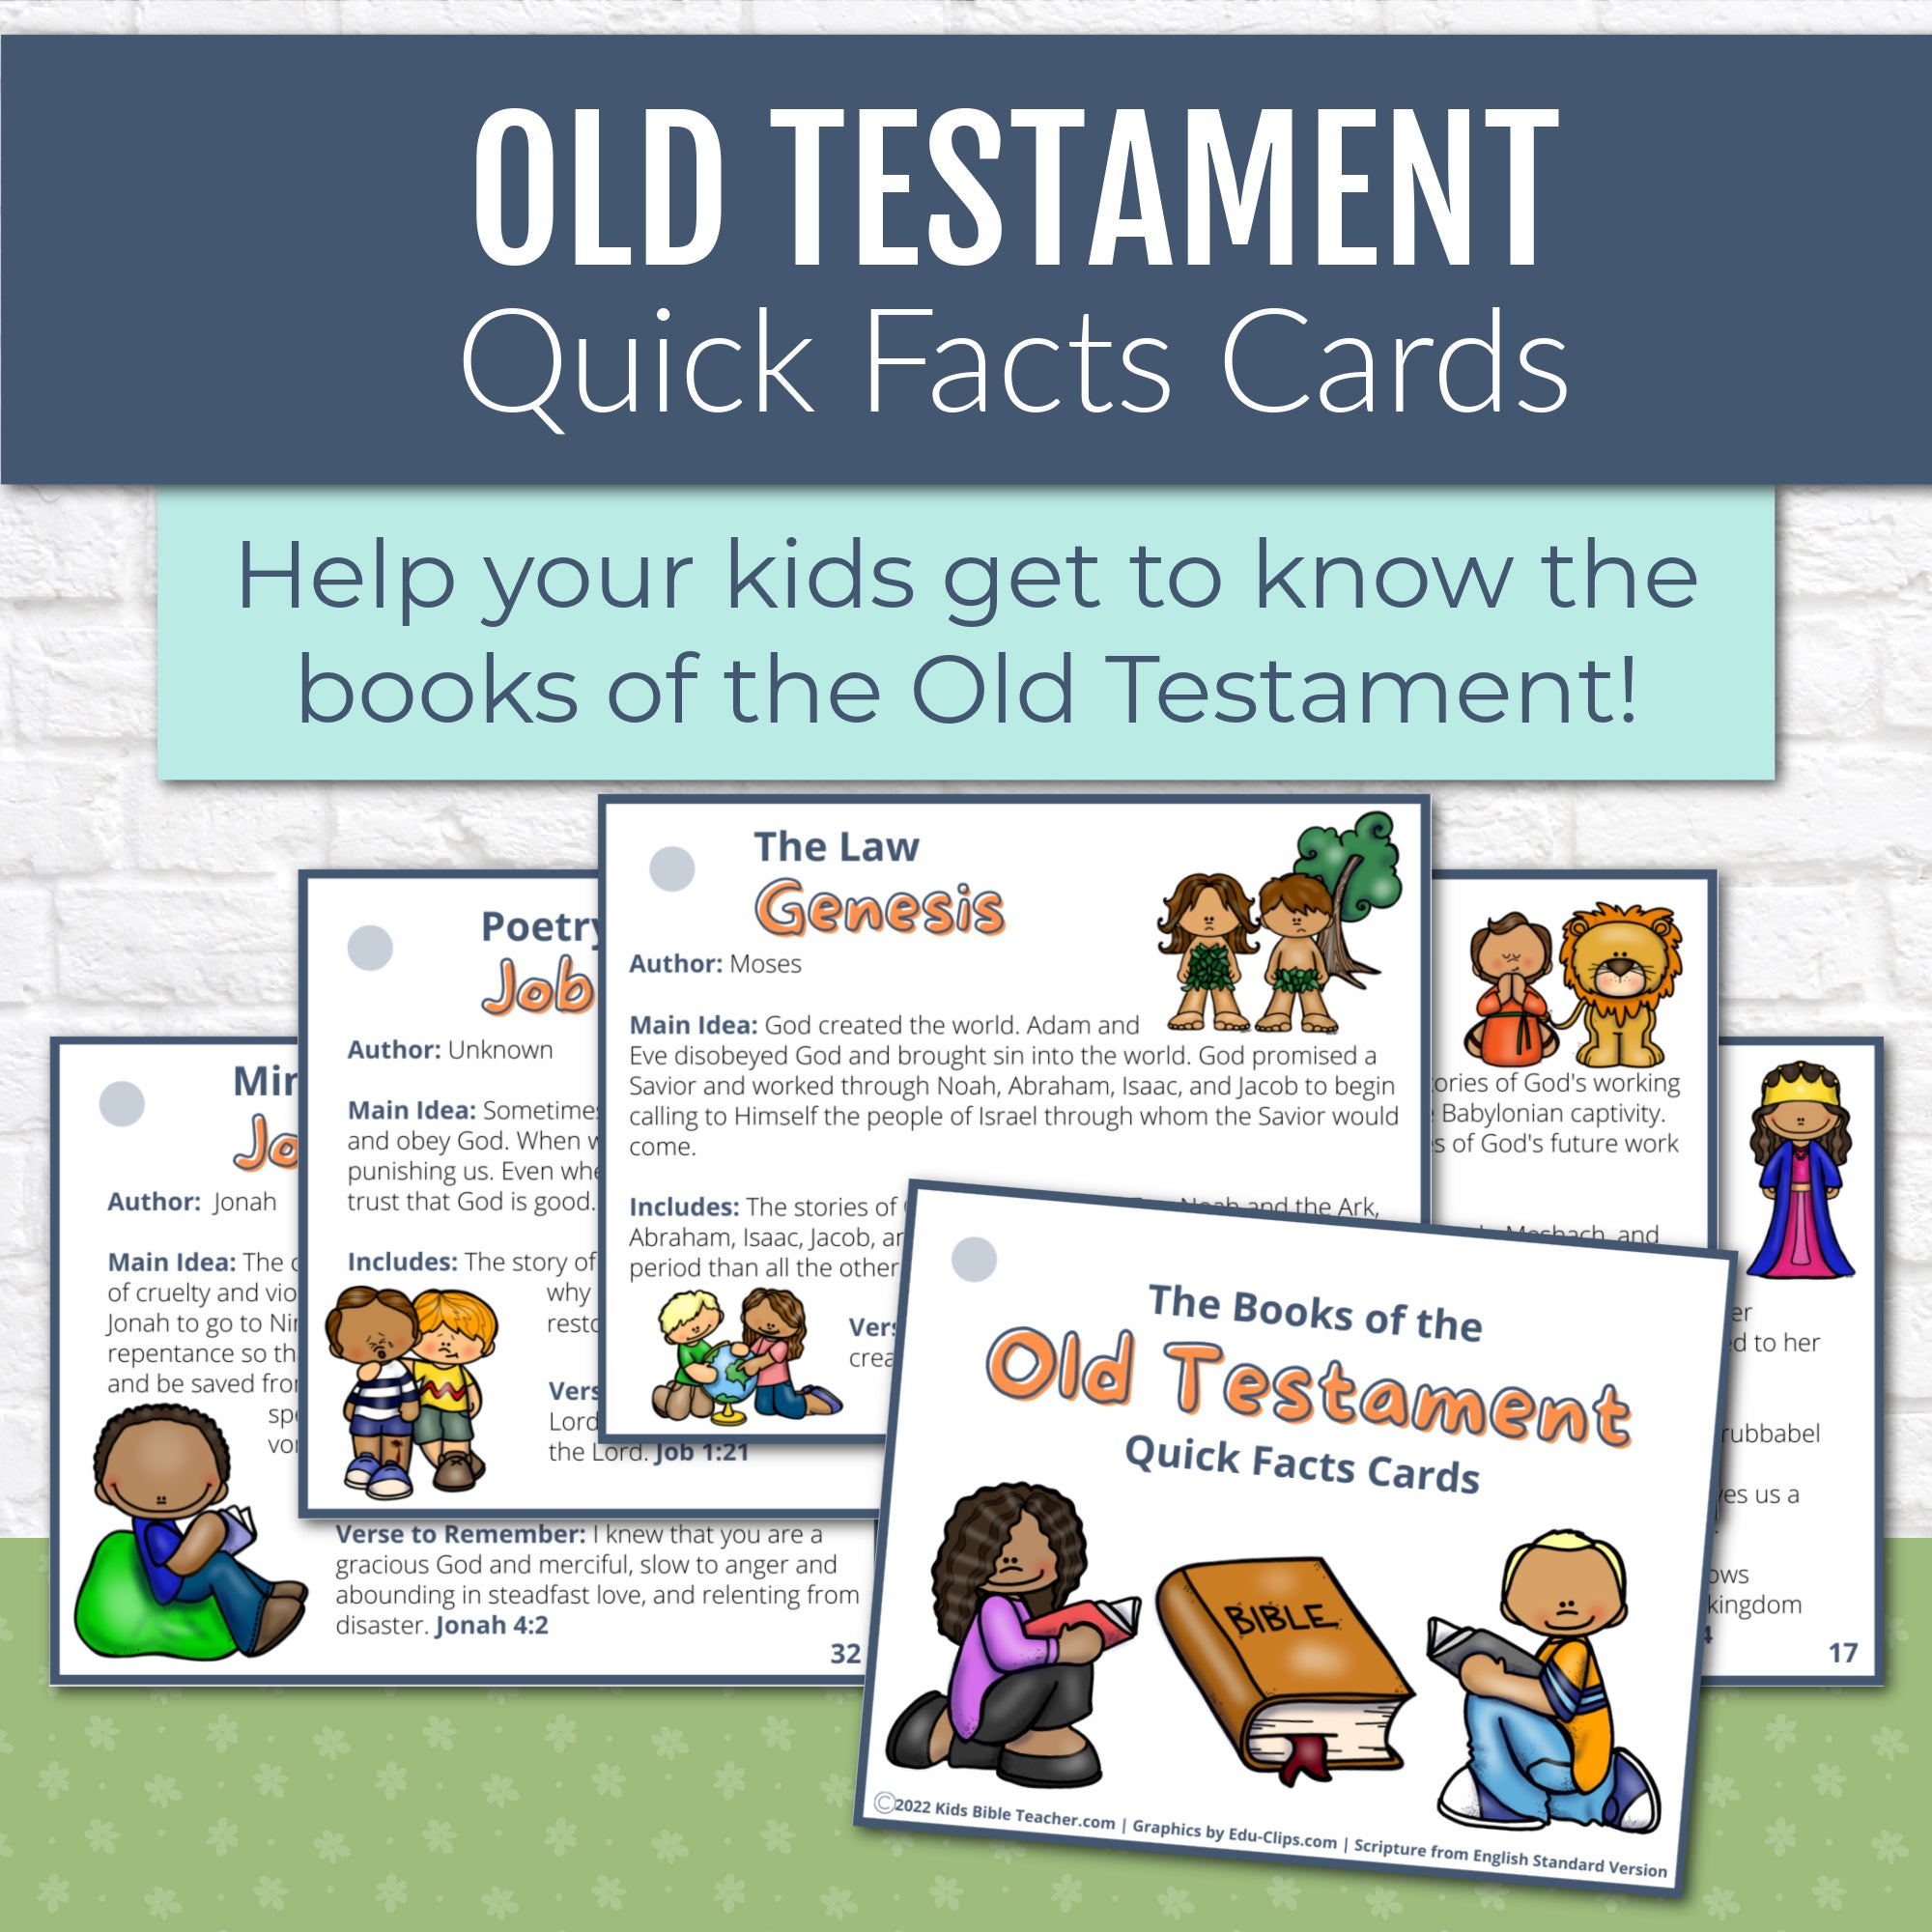 Old Testament Books of the Bible Quick Facts Cards